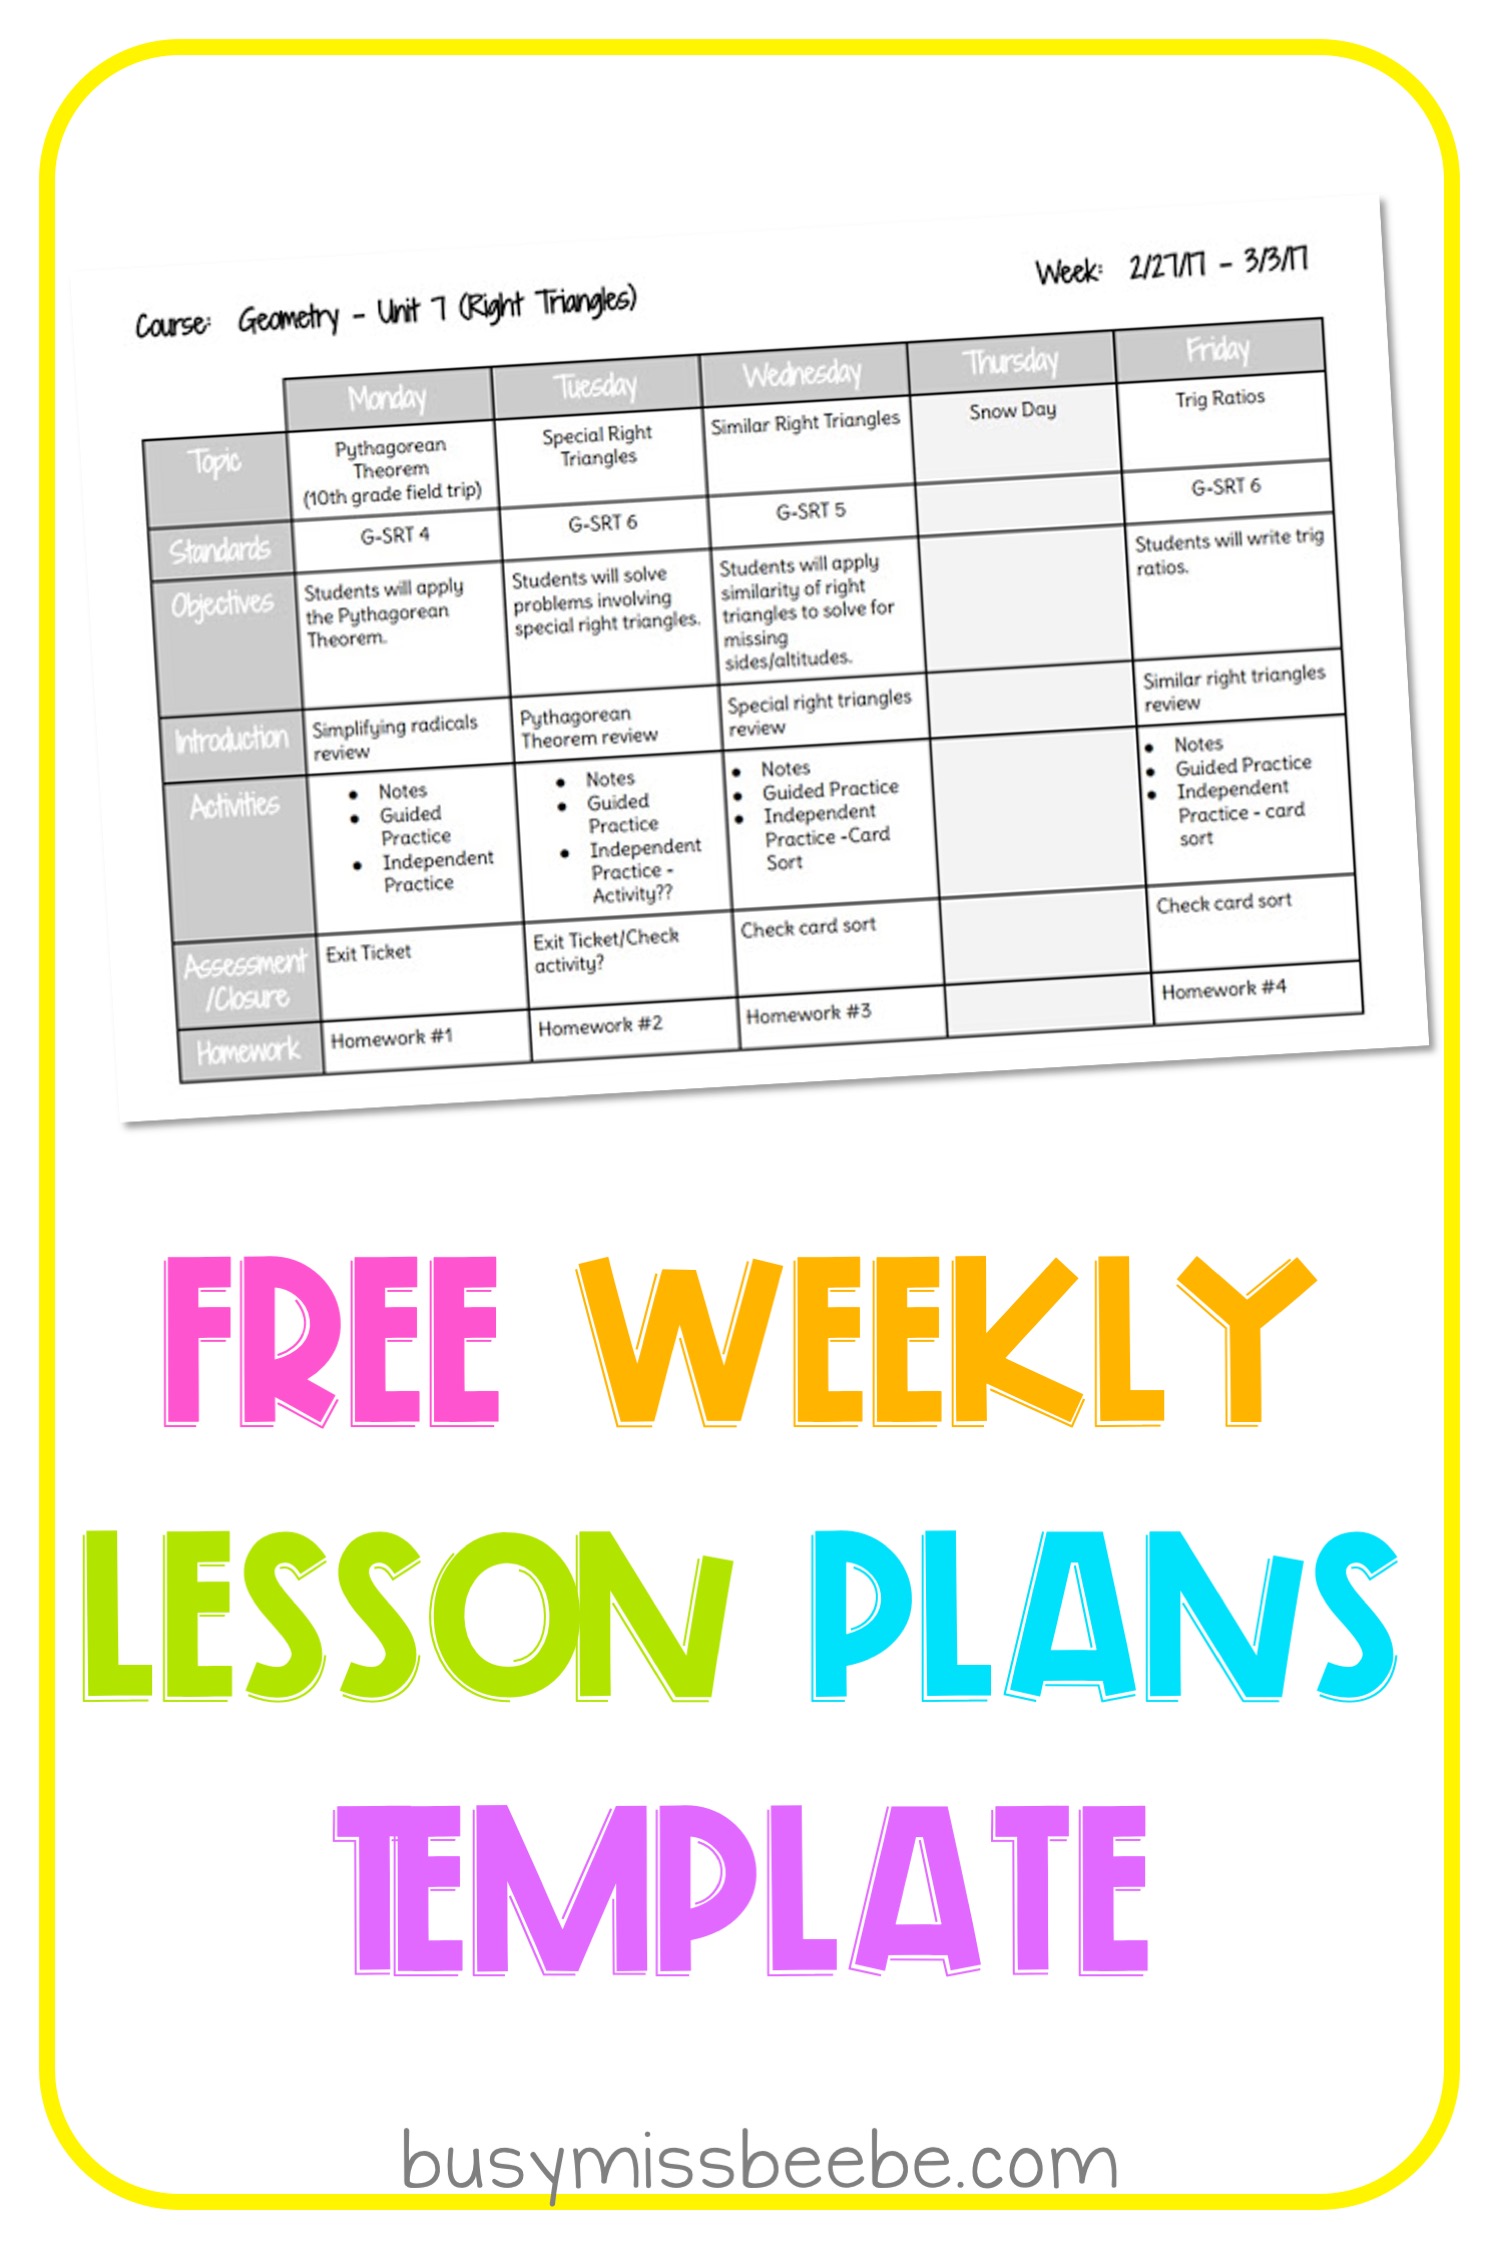 google-docs-lesson-plans-template-busy-miss-beebe